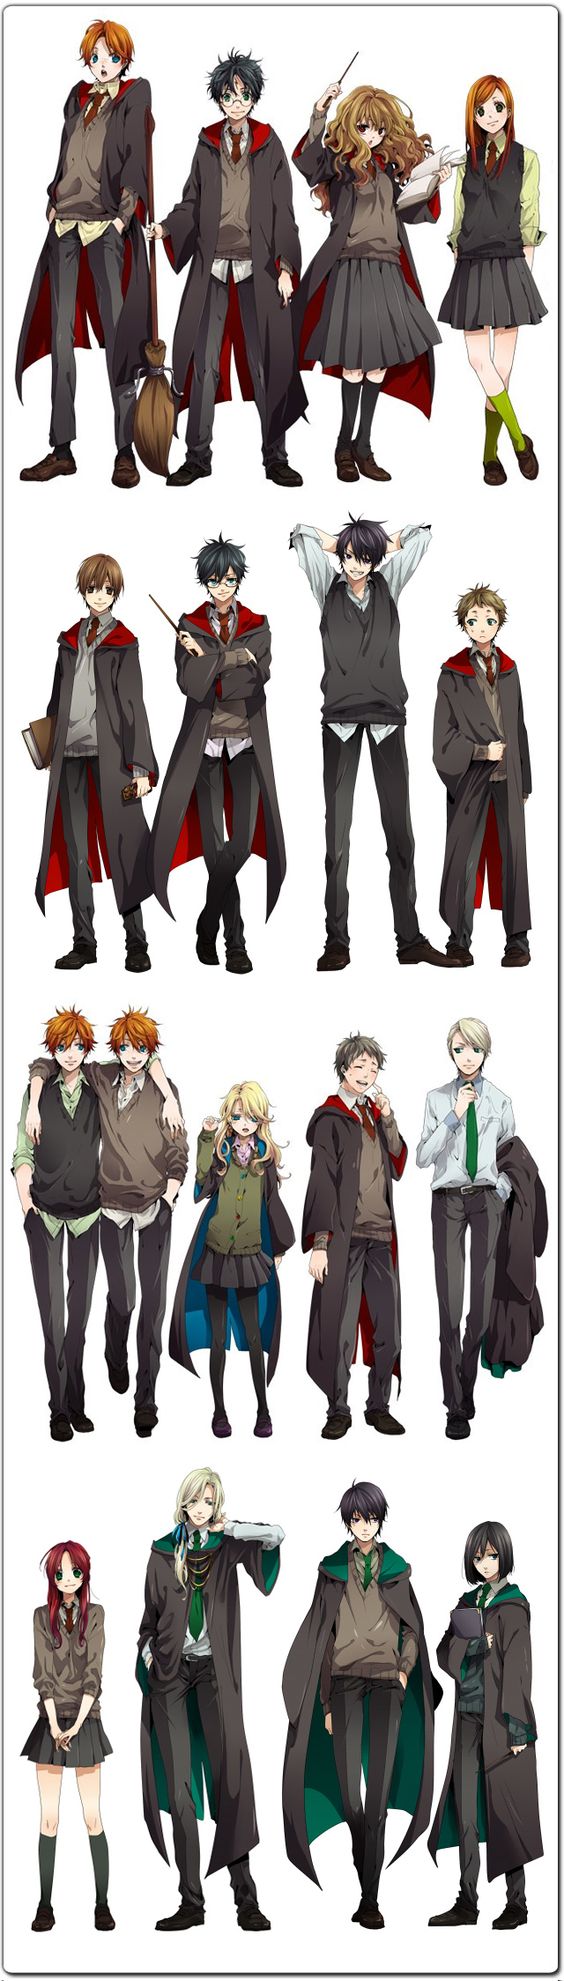 Anime Harry Potter! | Row 1: Ron, Harry, Hermonie and Ginny | Row 2: Remus Lupin, James Potter, Sirius Black and Pettigrew| Row 3: Fred & George, Luna, Neville and Draco | Row 4: Lily Evans, Lucius Malfoy, Regulus Black and Snape